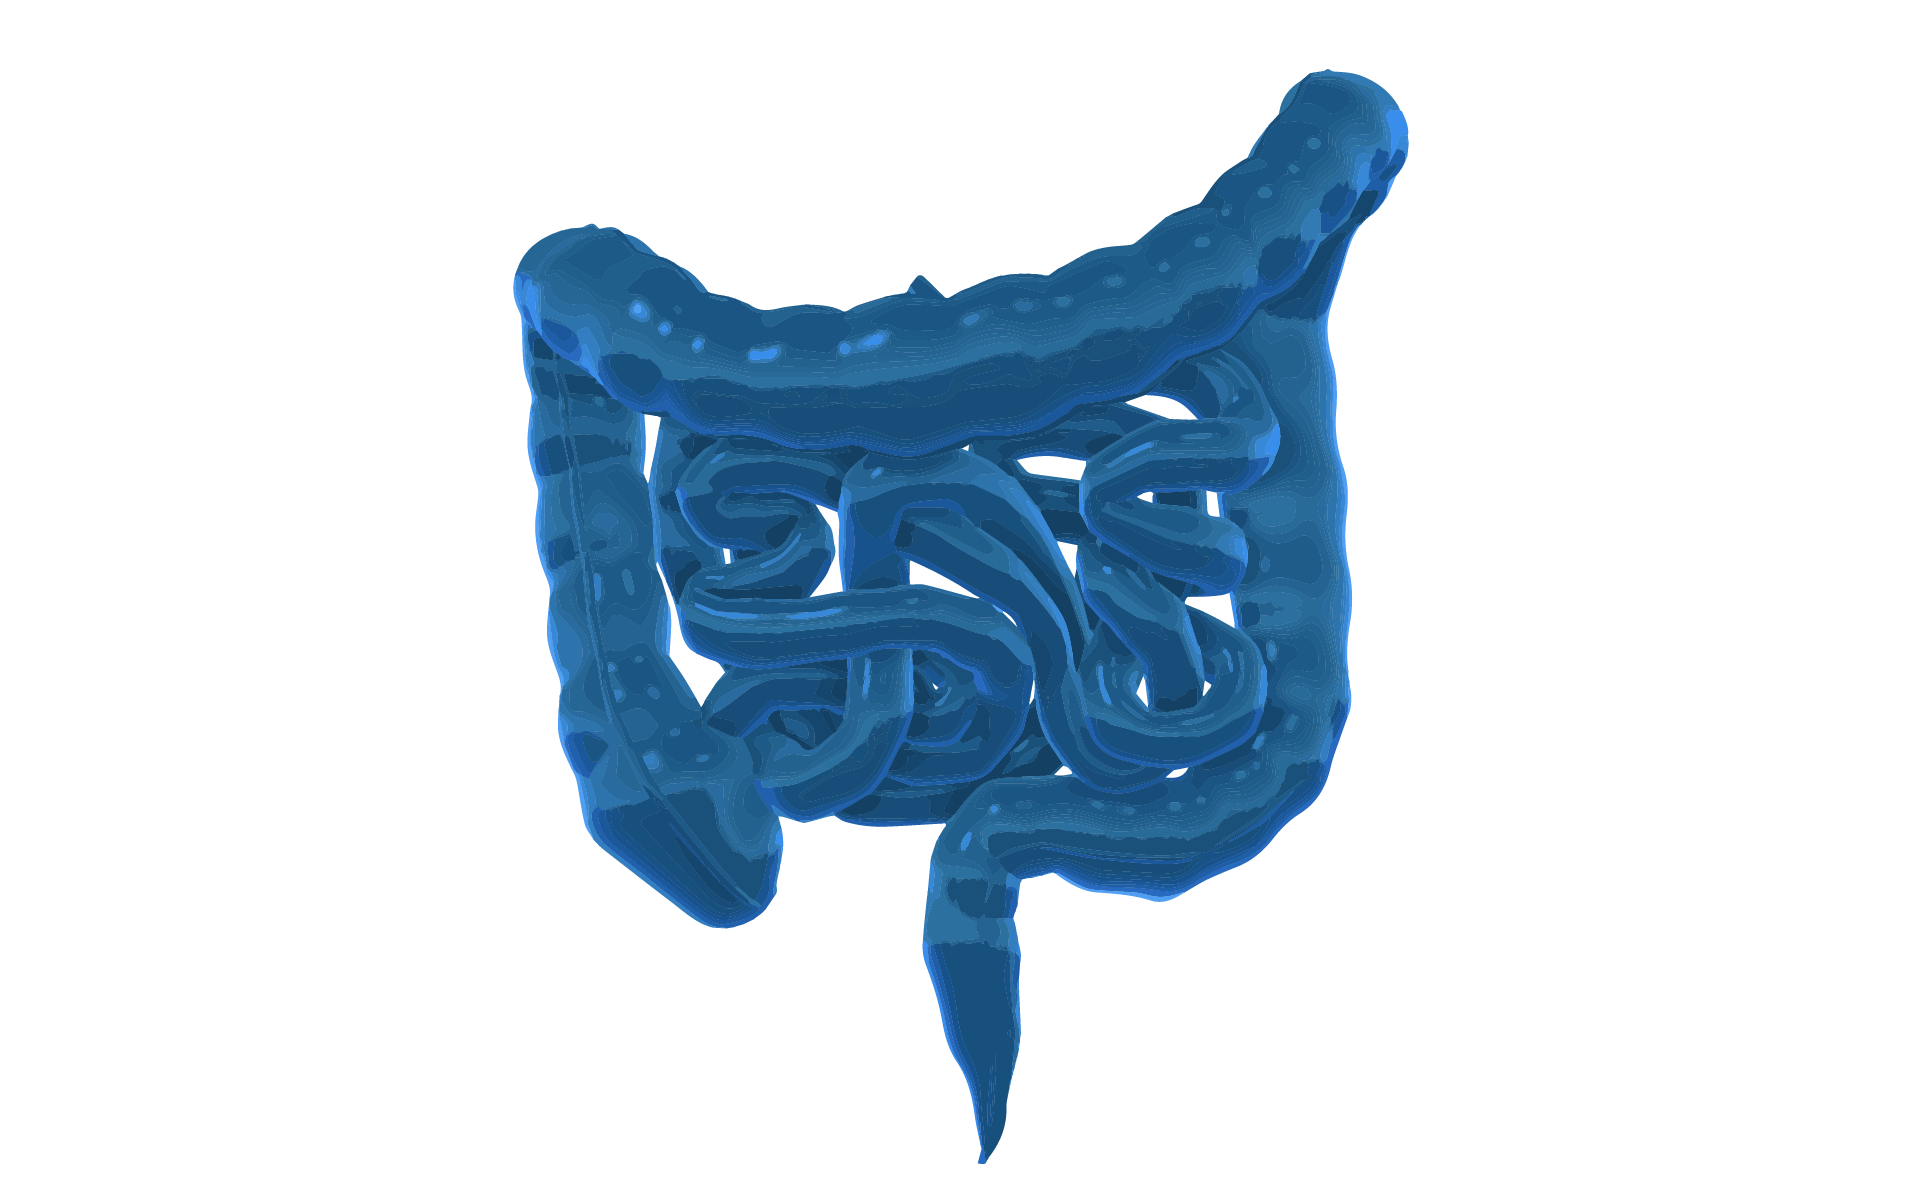 A 3D graphic image of the human gastrointestinal system